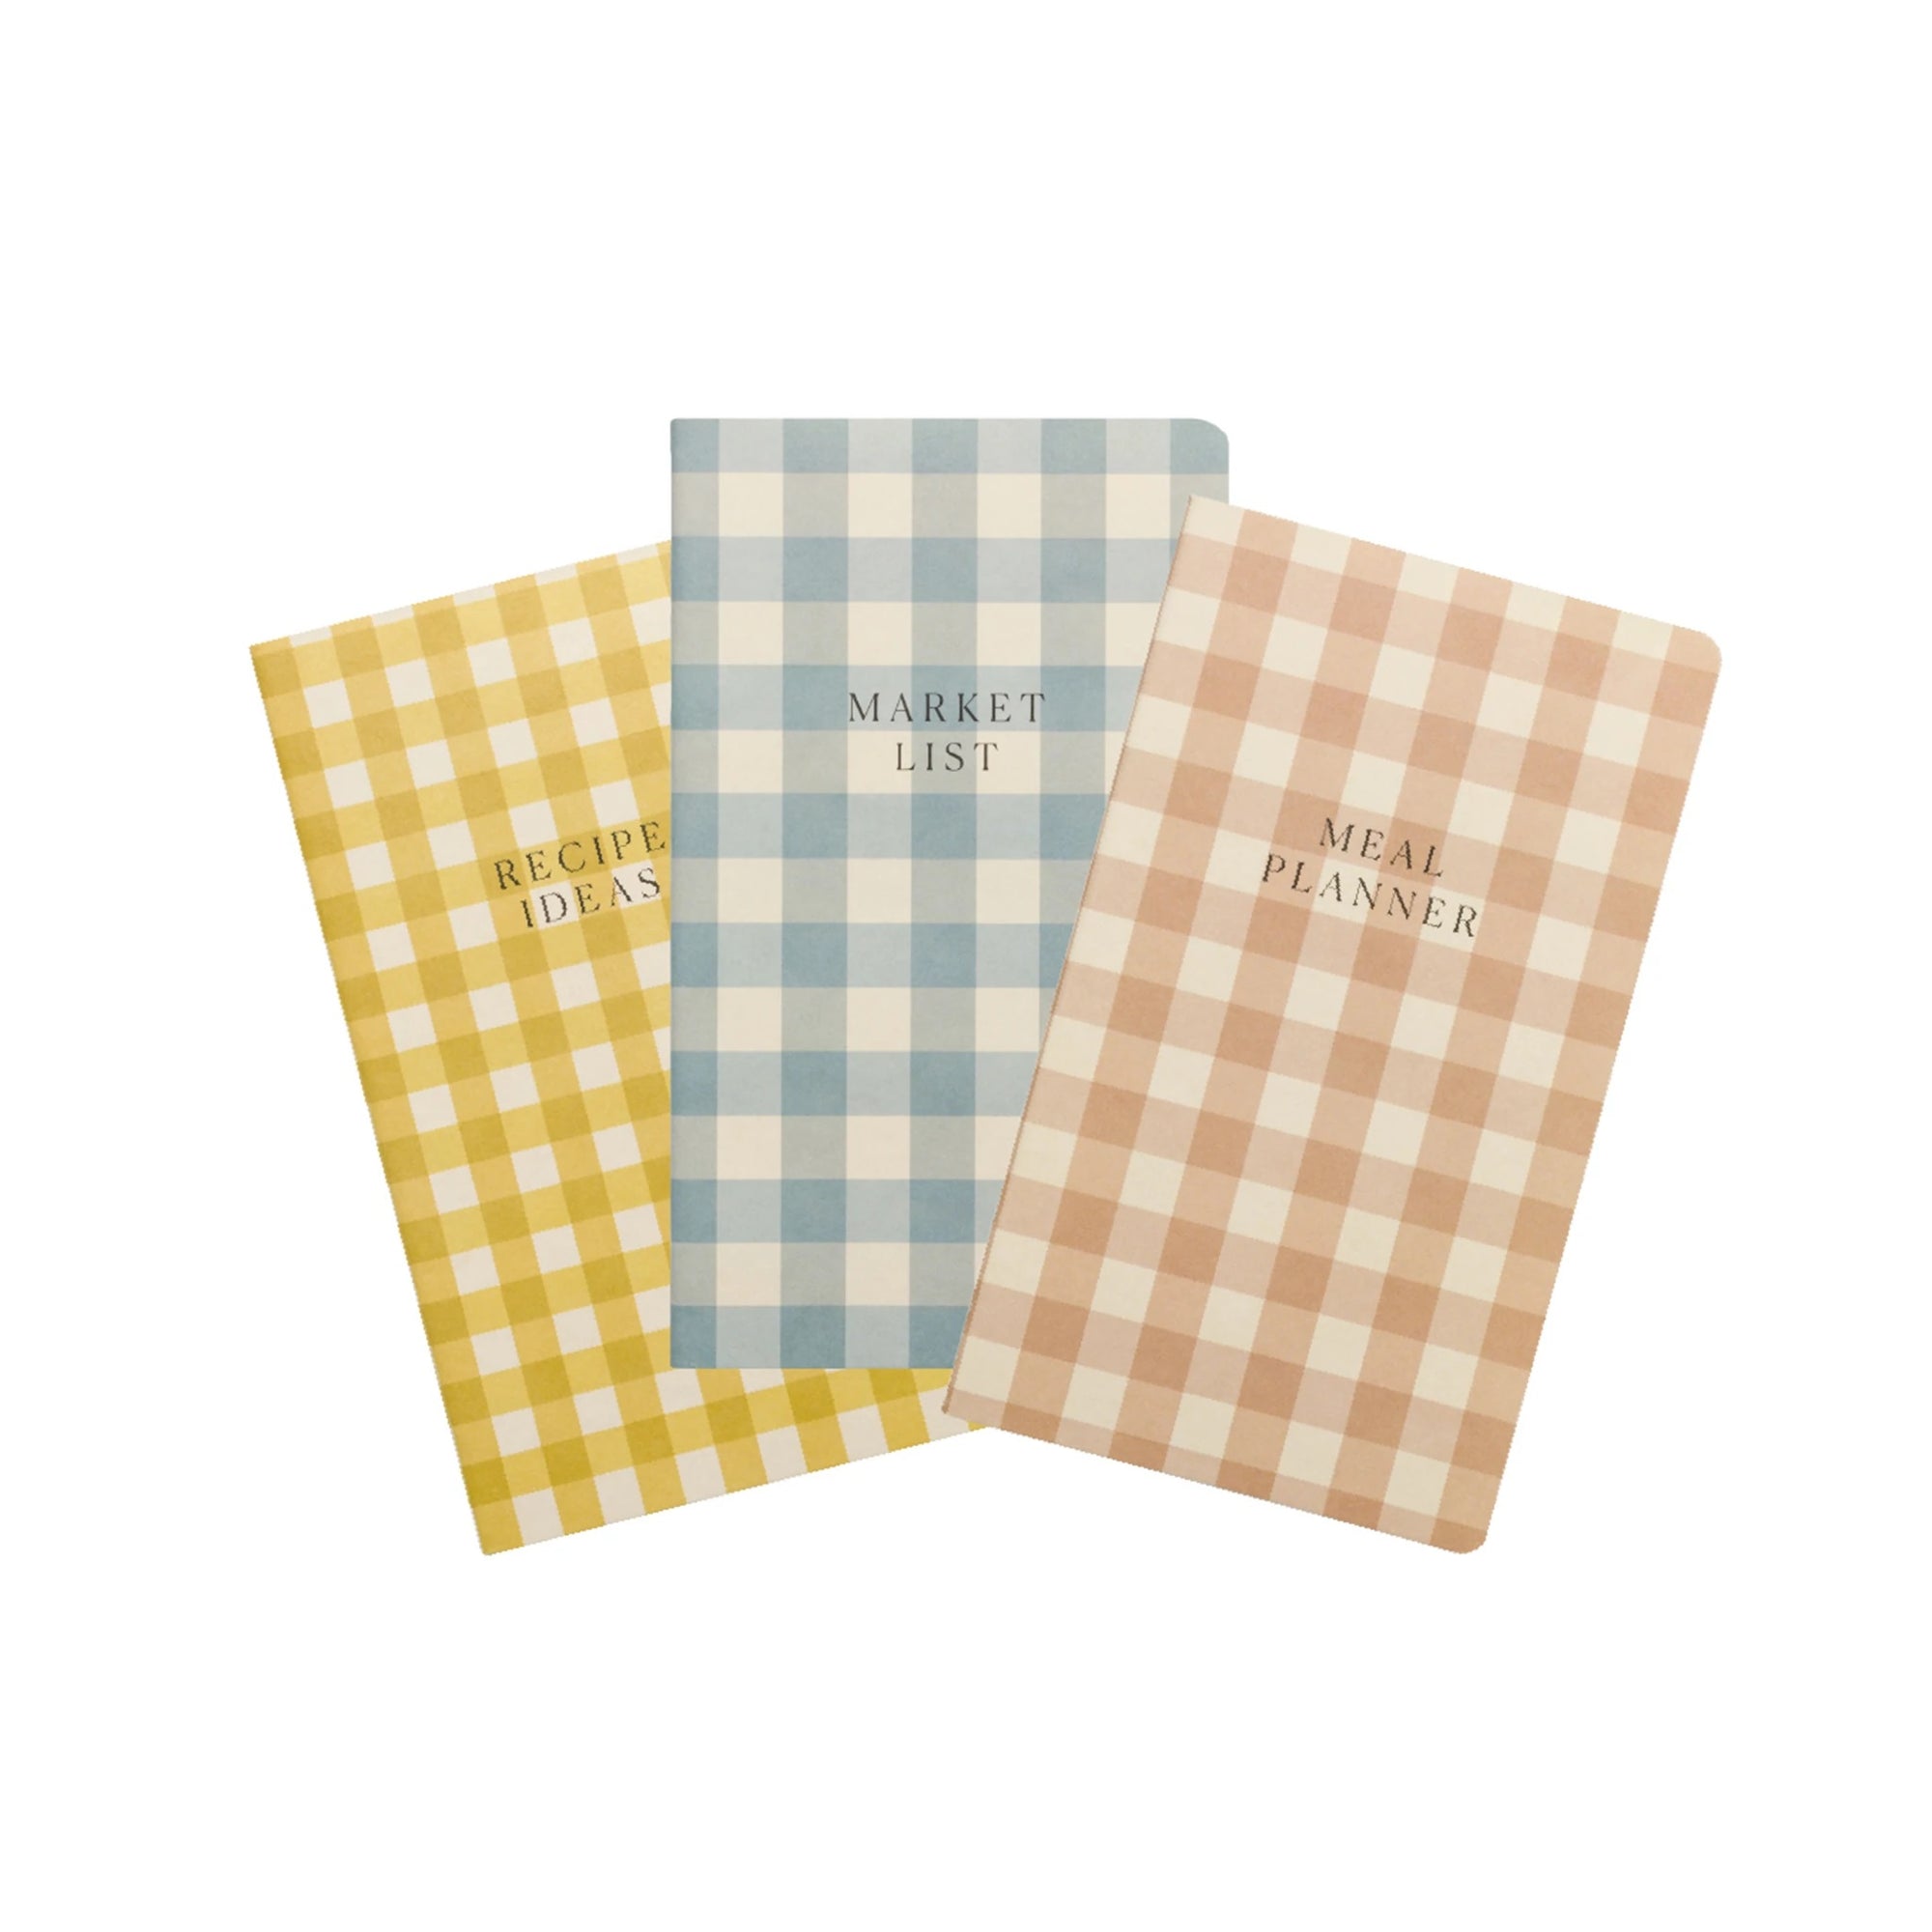 Set of 3 Gingham Planners (Meal Planner, Market List, Recipes)